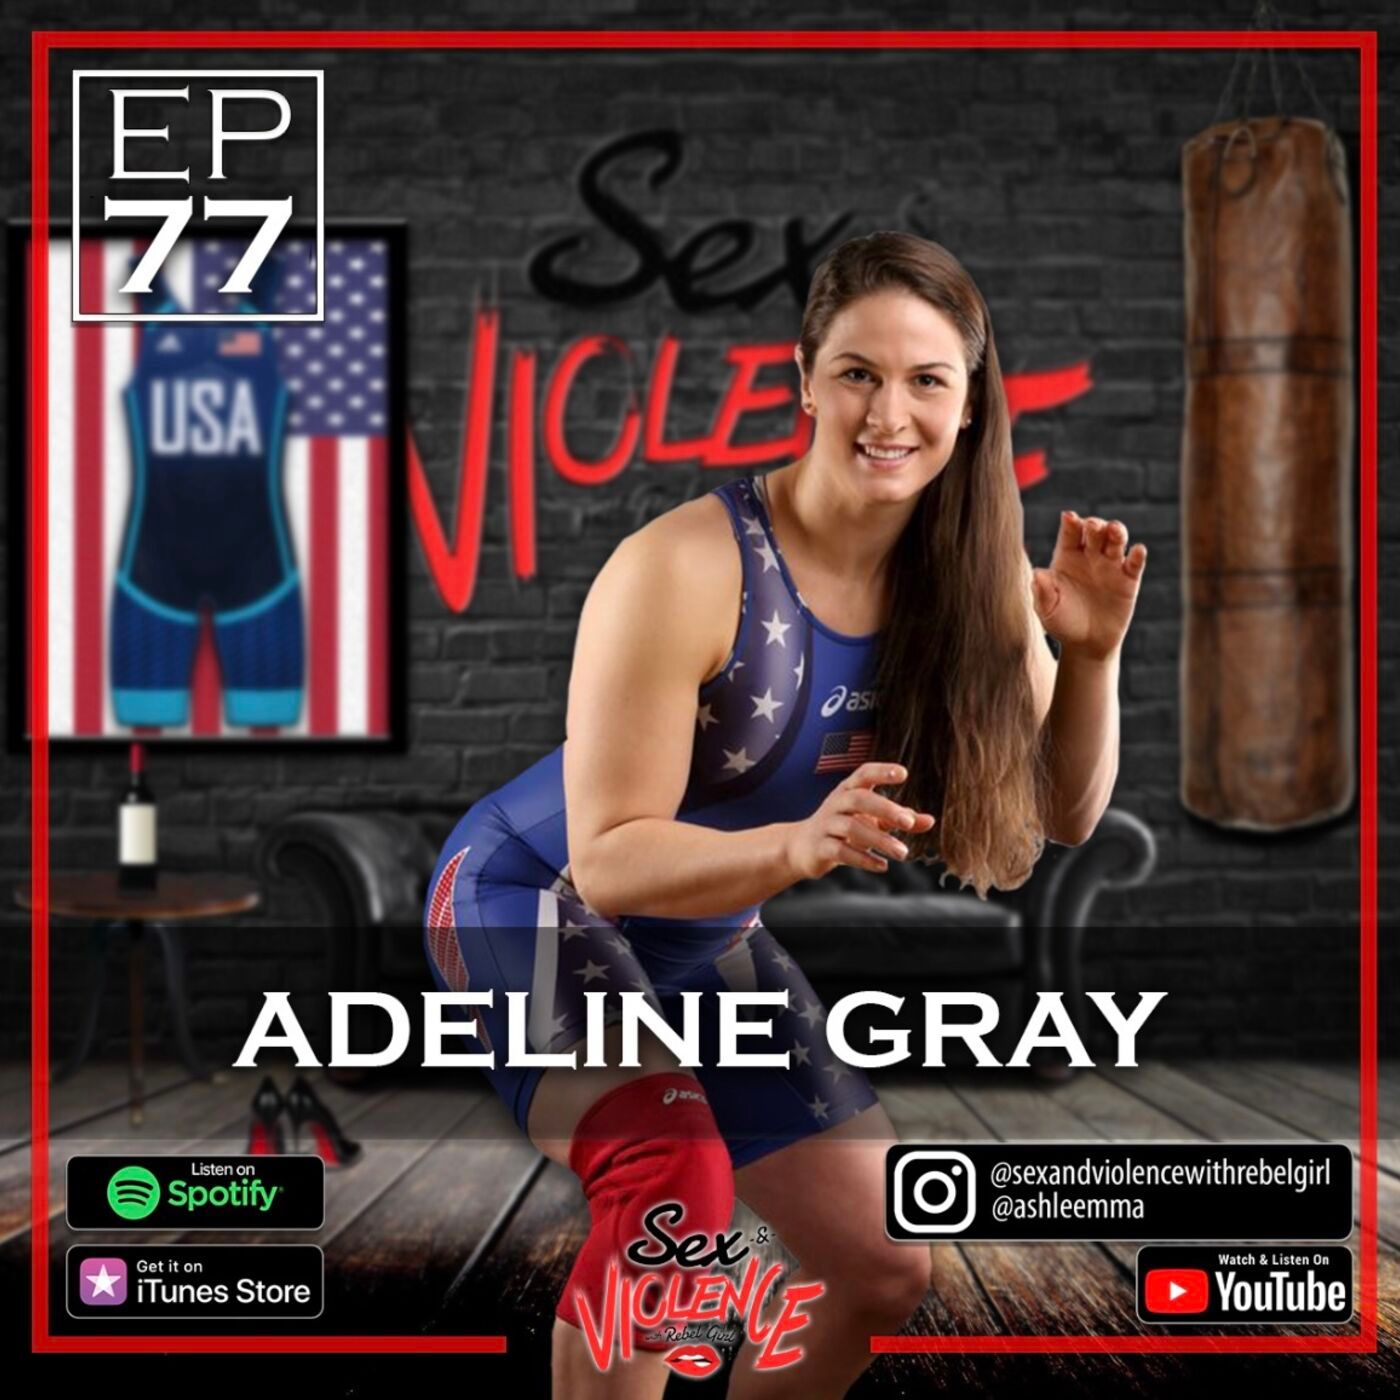 Ep.77 Adeline Gray – Sex And Violence With Rebel Girl – Podcast image